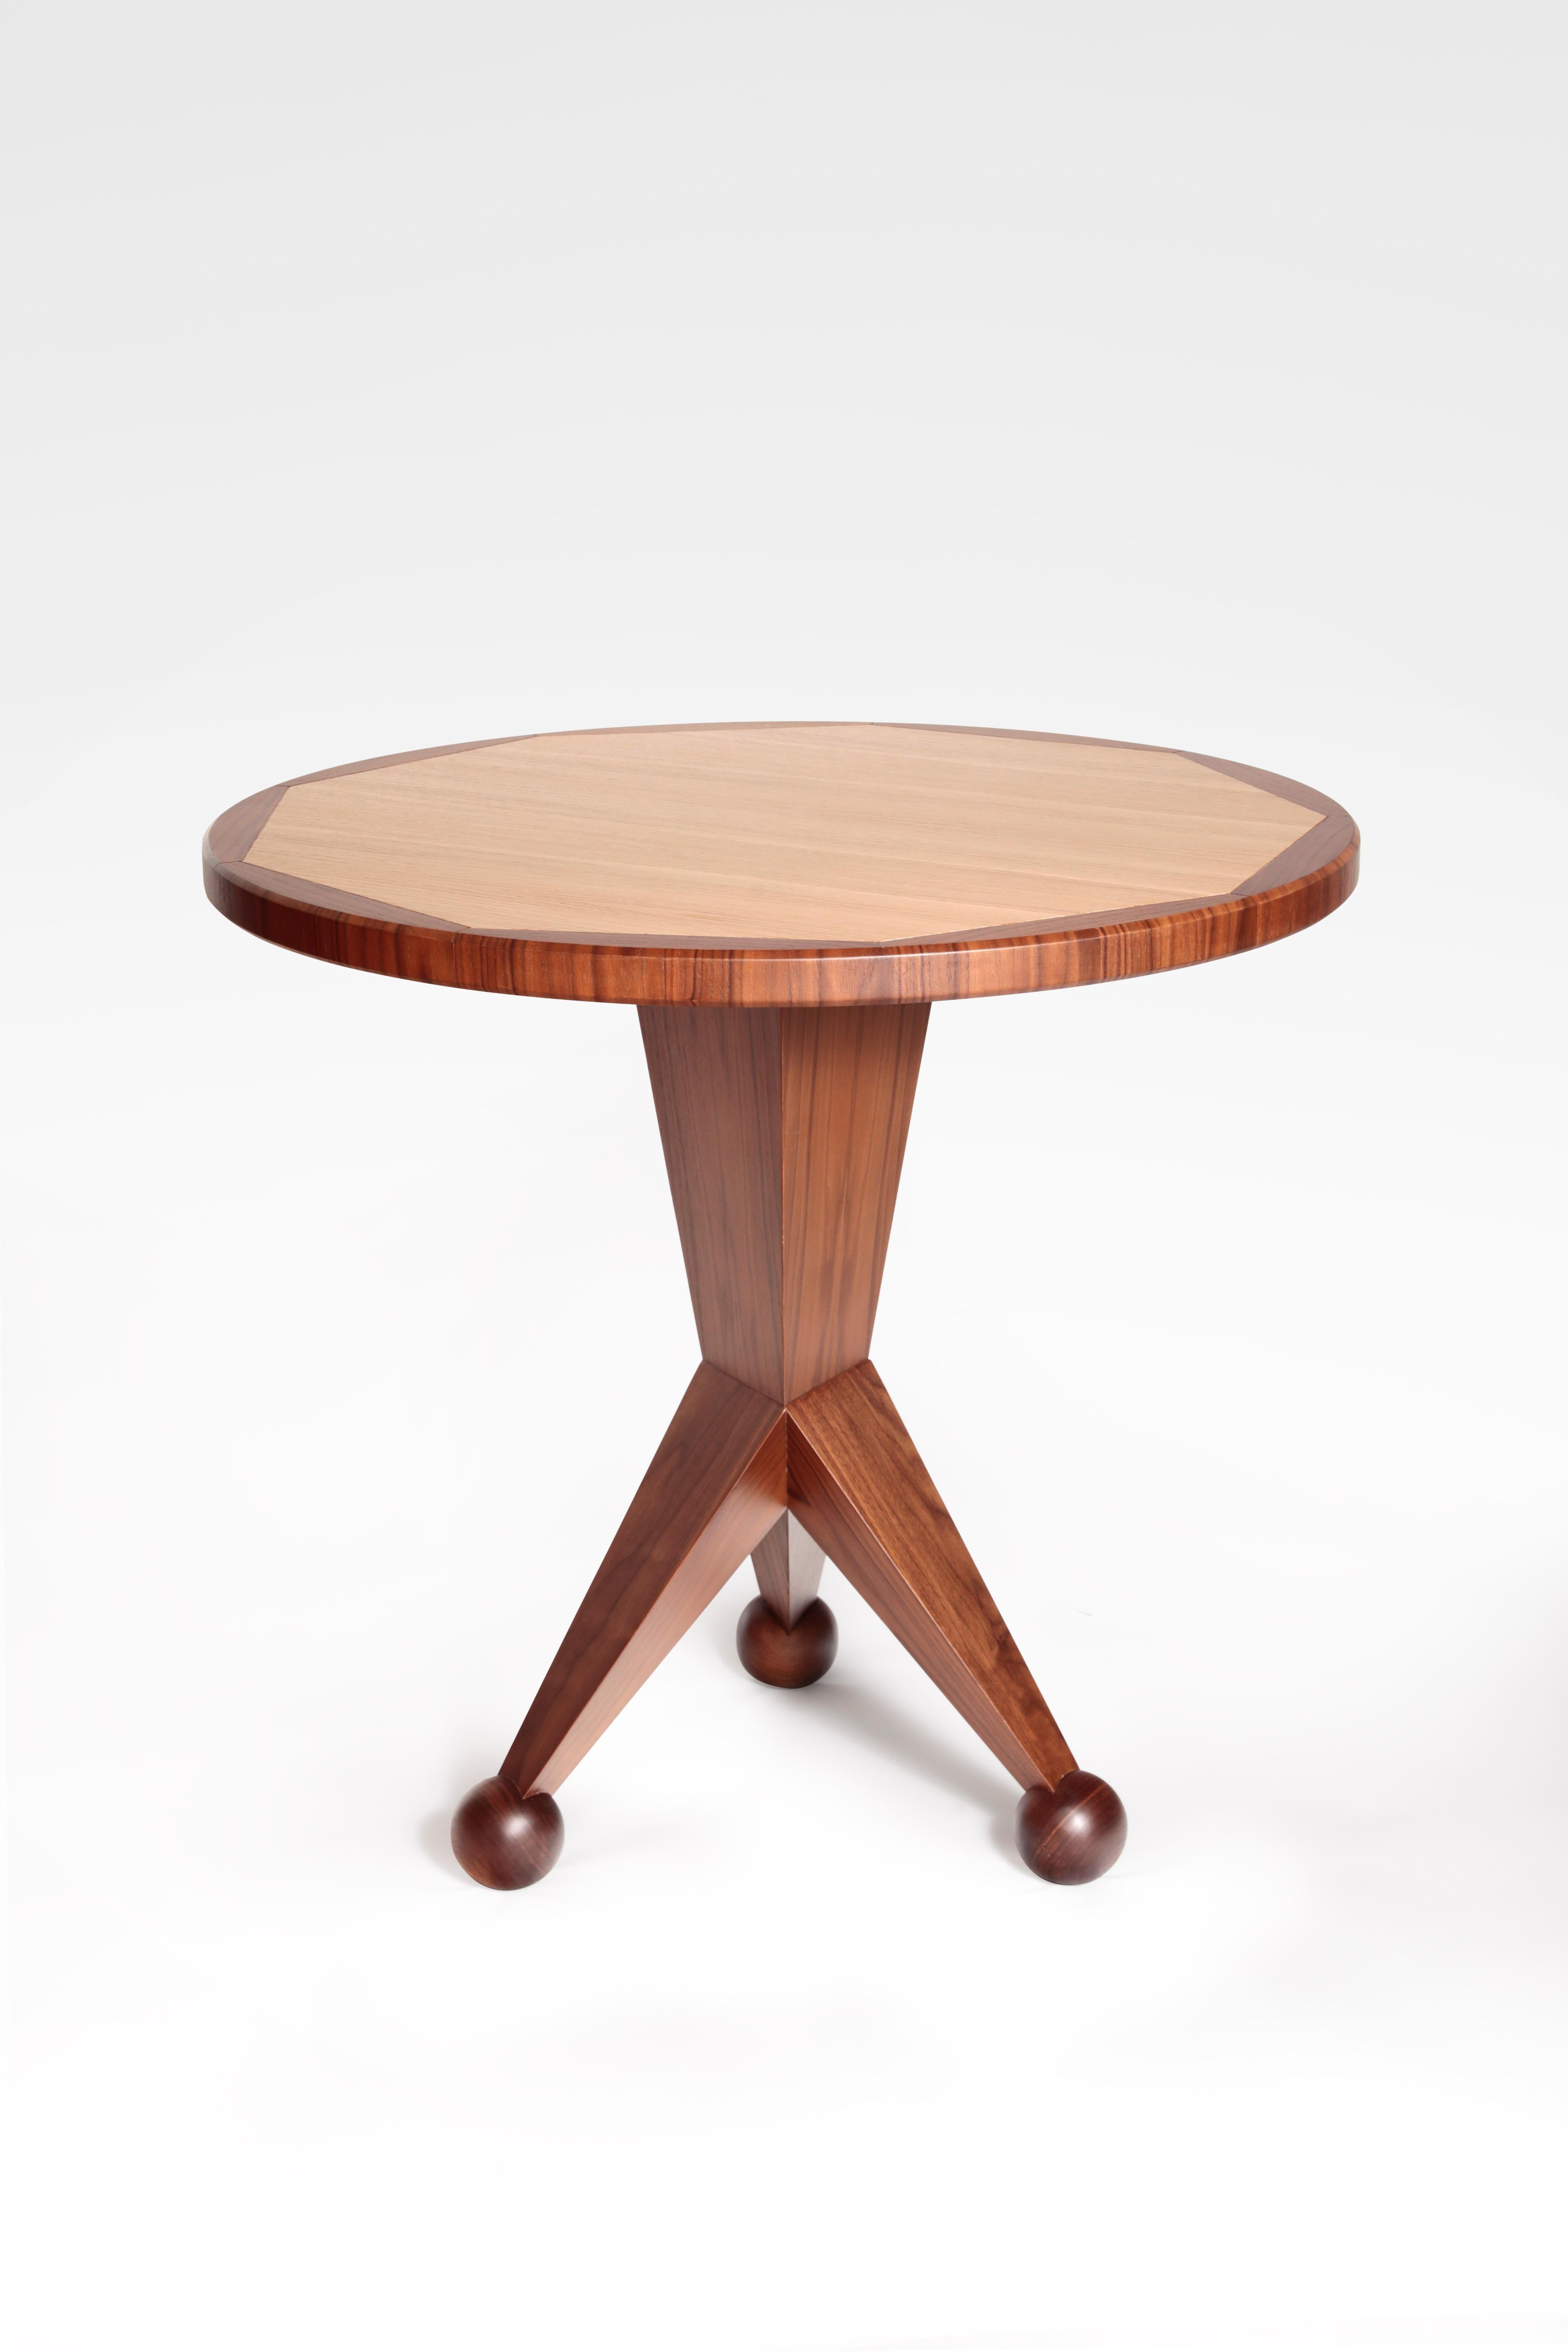 Octogonal Solid Oak Triptych Leg Table from Laura Gonzalez Collection 1